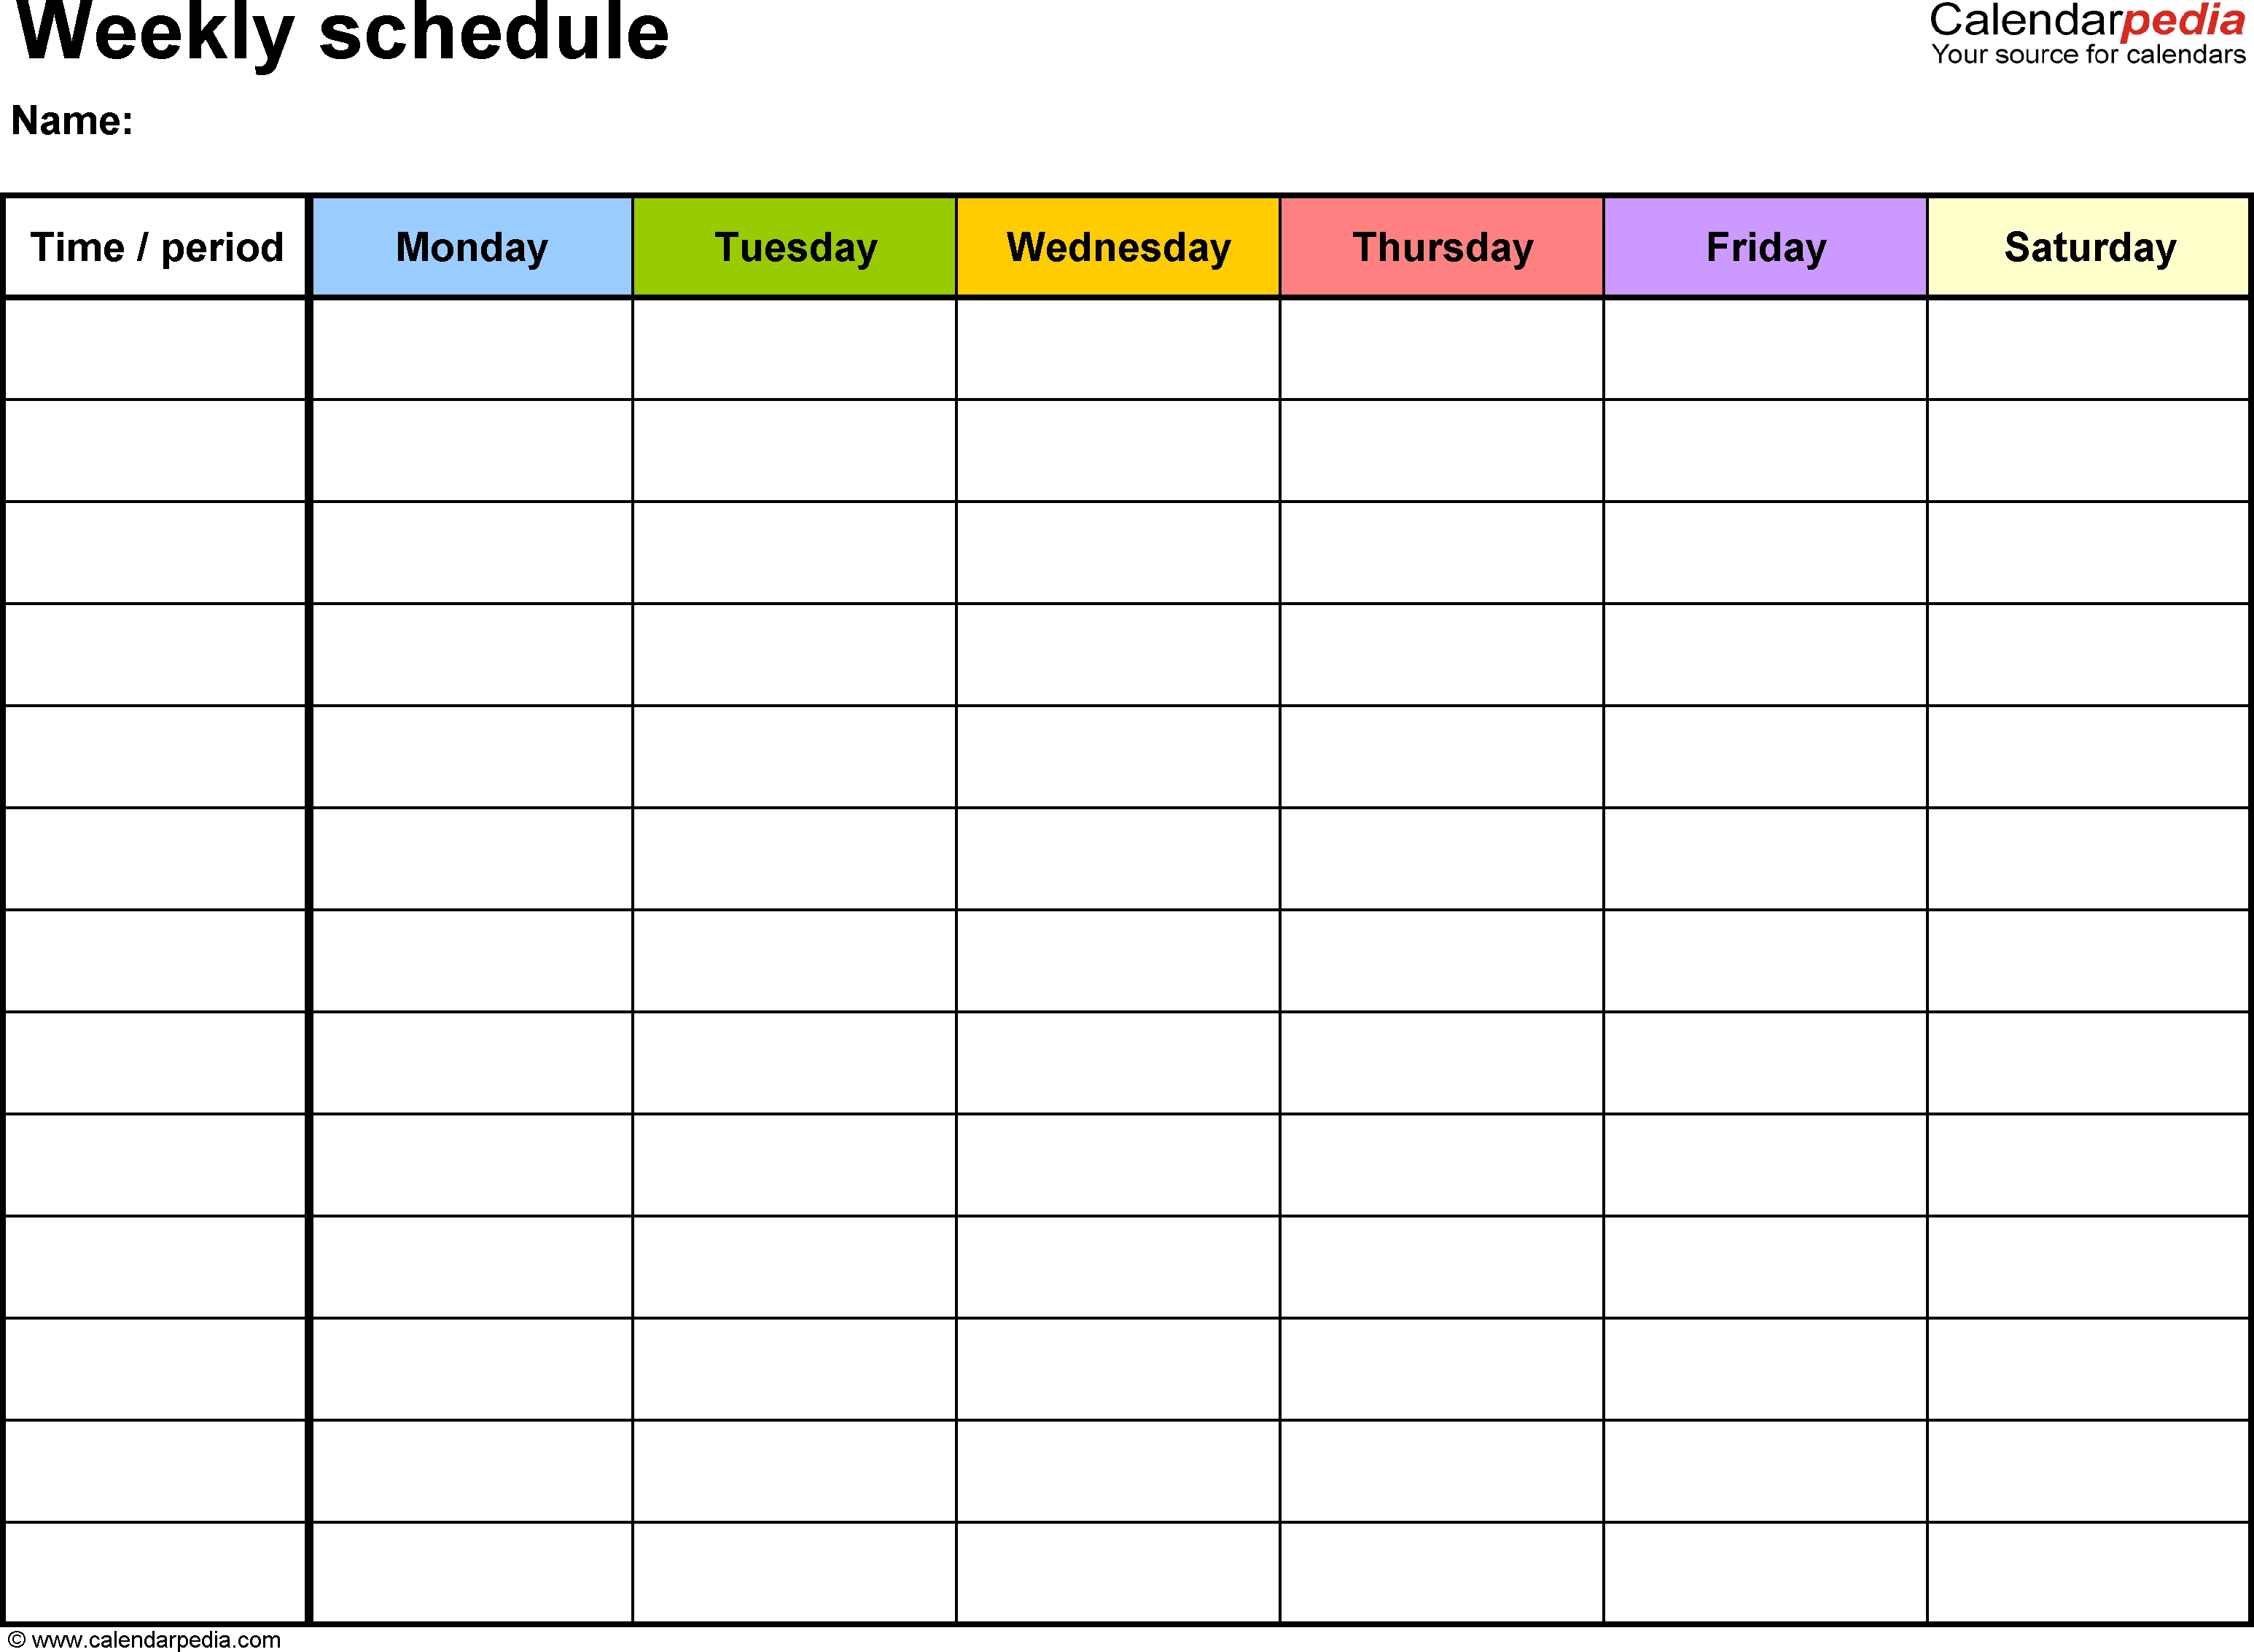 Free Weekly Schedule Templates For Word - 18 Templates  Monday Though Friday Timed Schedule